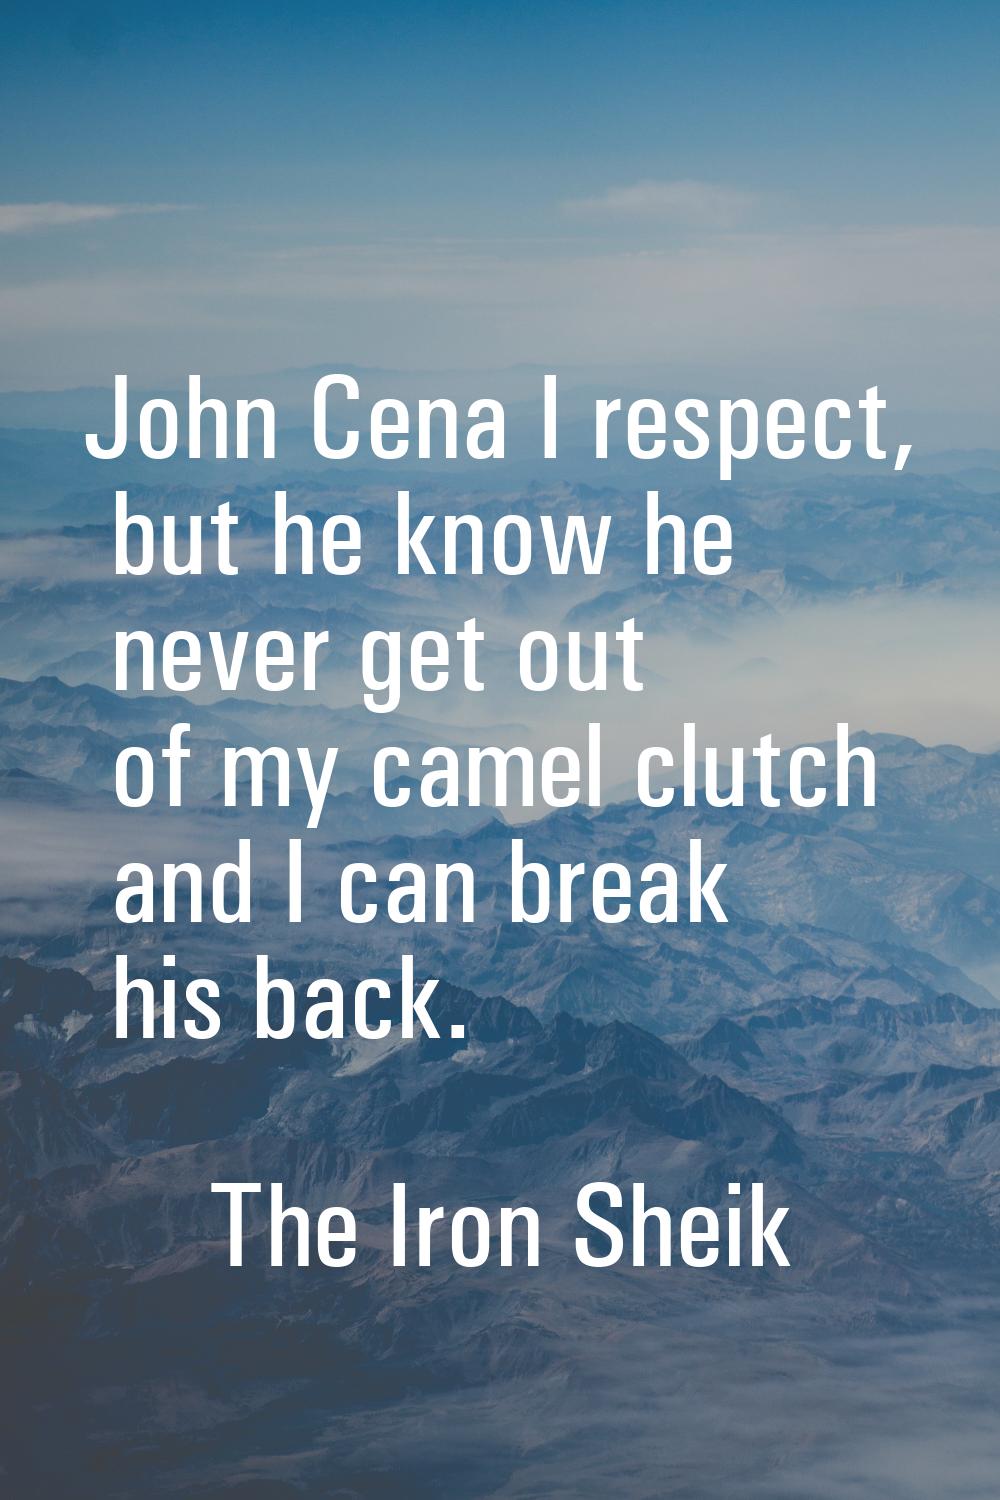 John Cena I respect, but he know he never get out of my camel clutch and I can break his back.